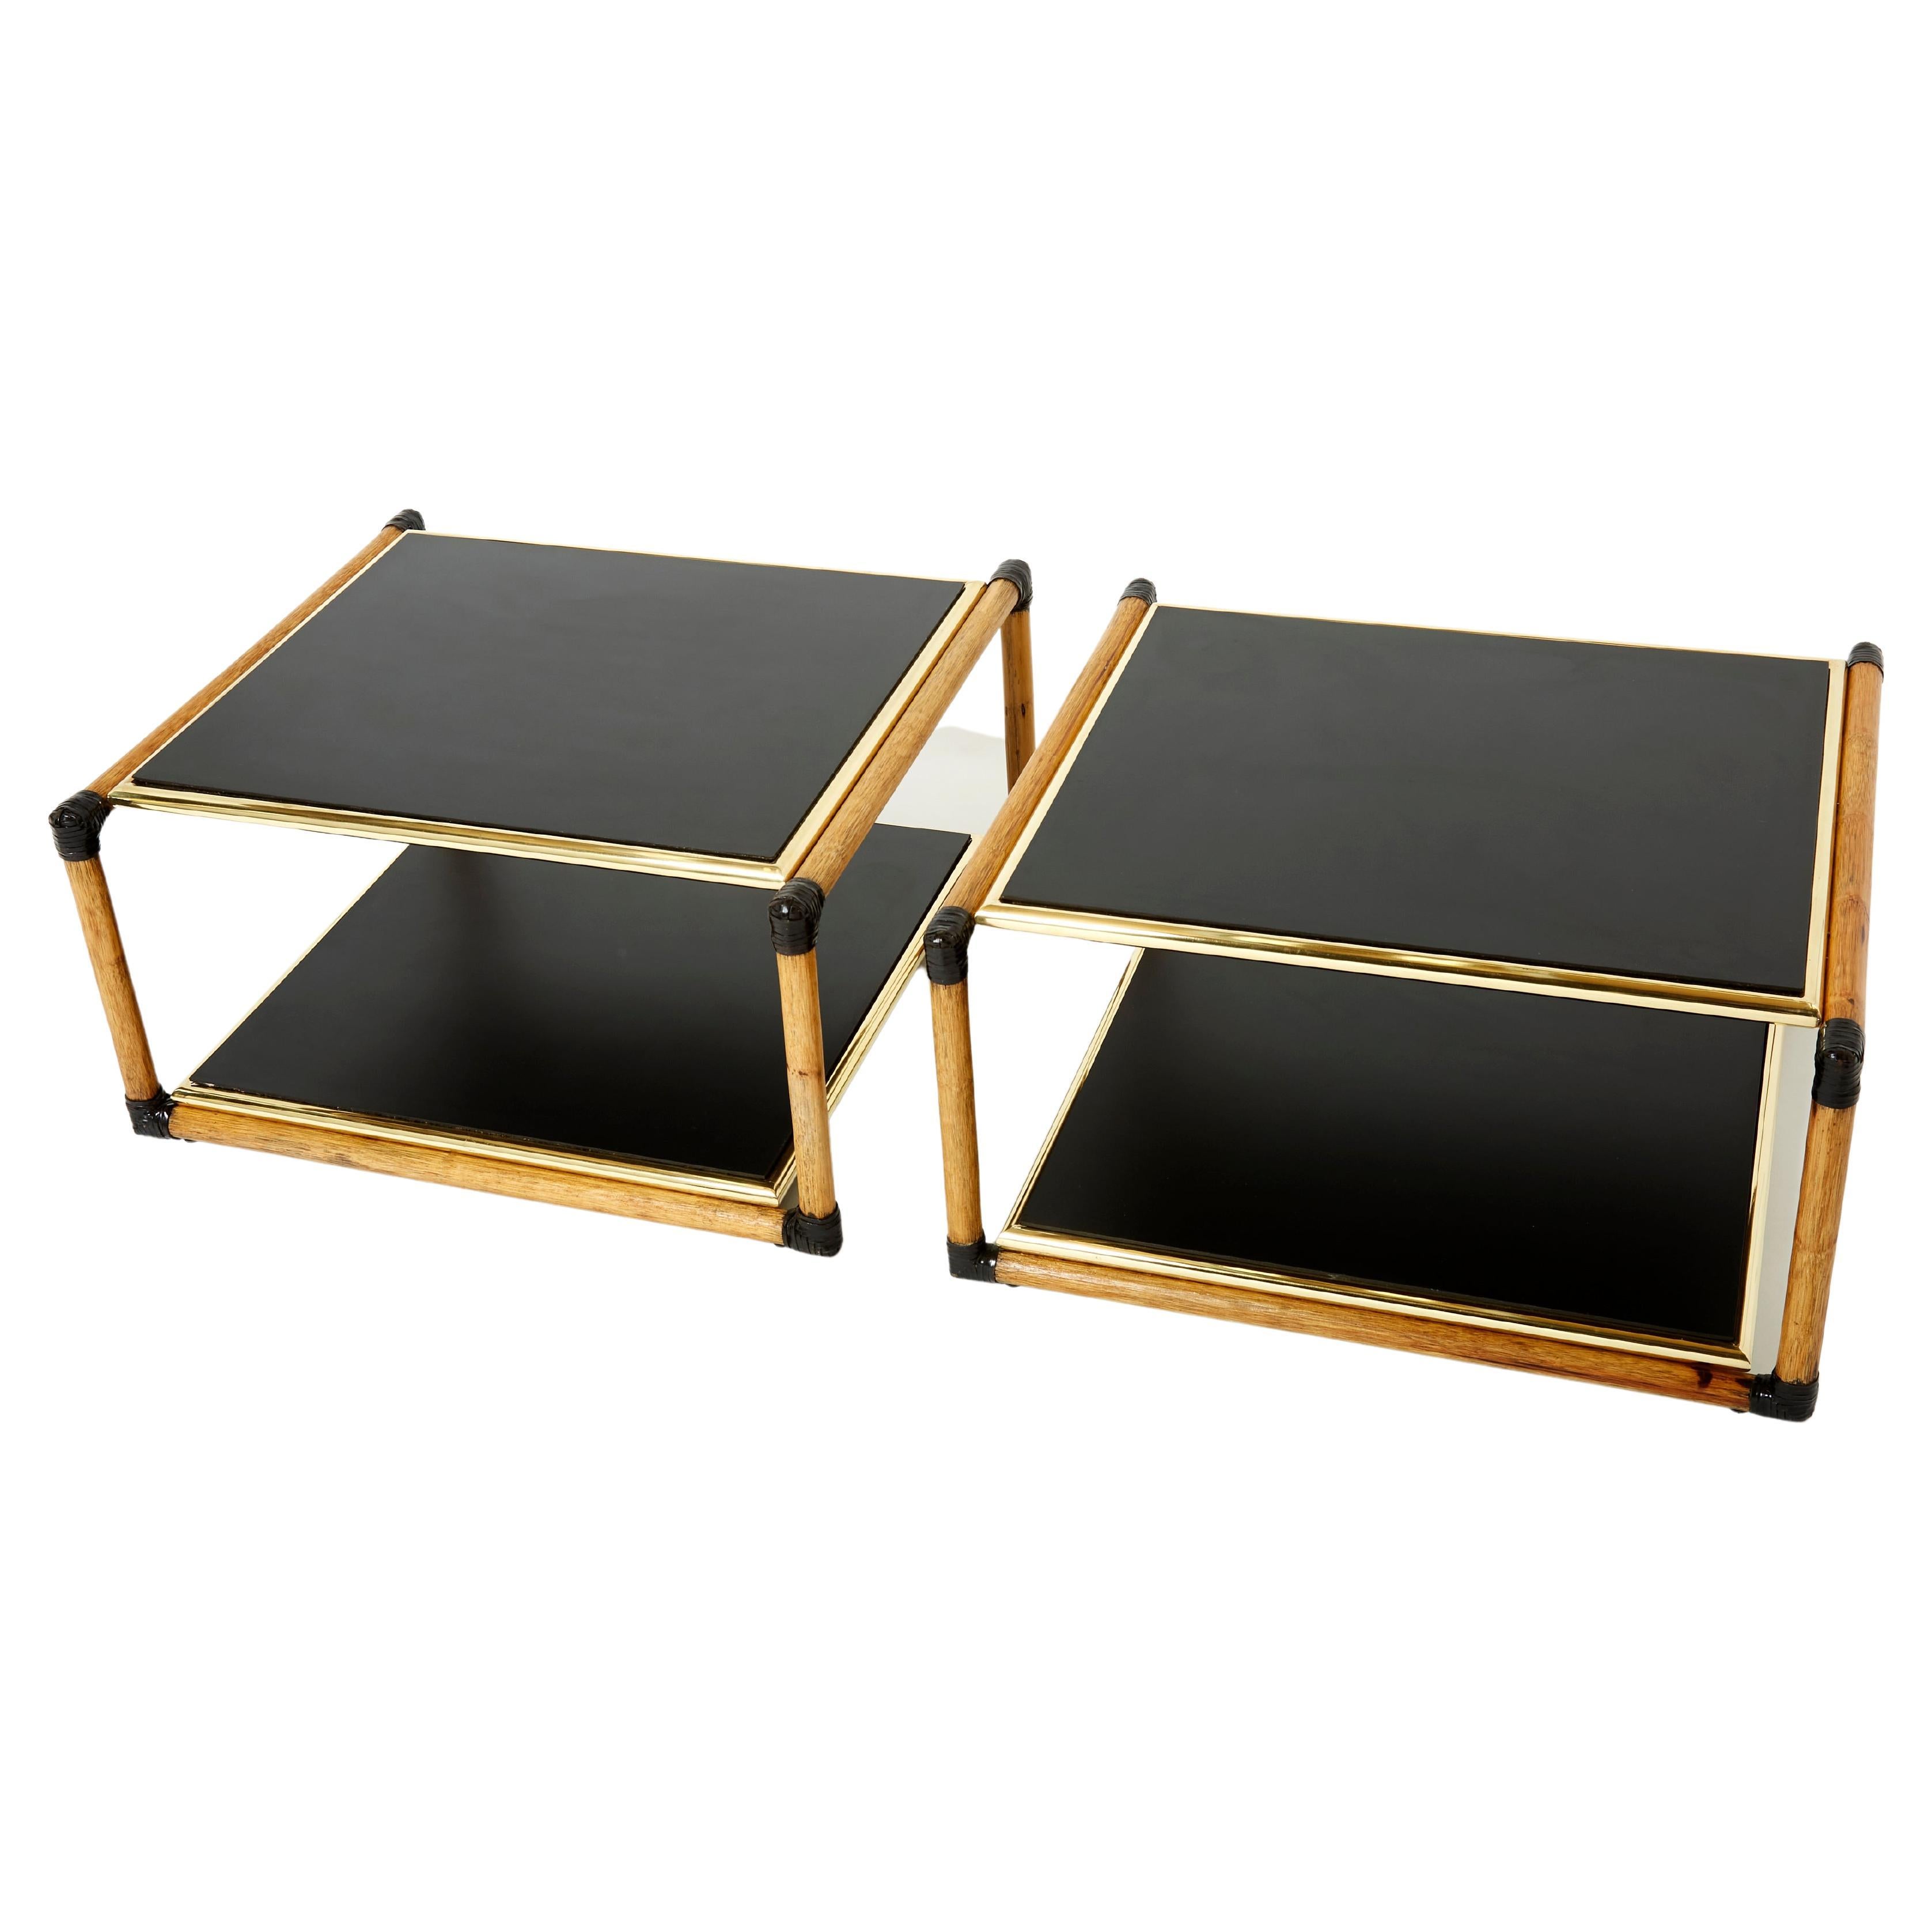 Pair of Italian Alberto Smania bamboo brass black wood side tables 1970s For Sale